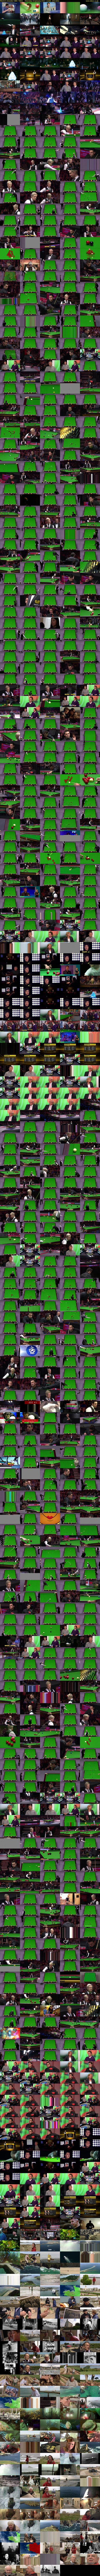 Masters Snooker (BBC TWO) Thursday 19 January 2017 13:00 - 17:00